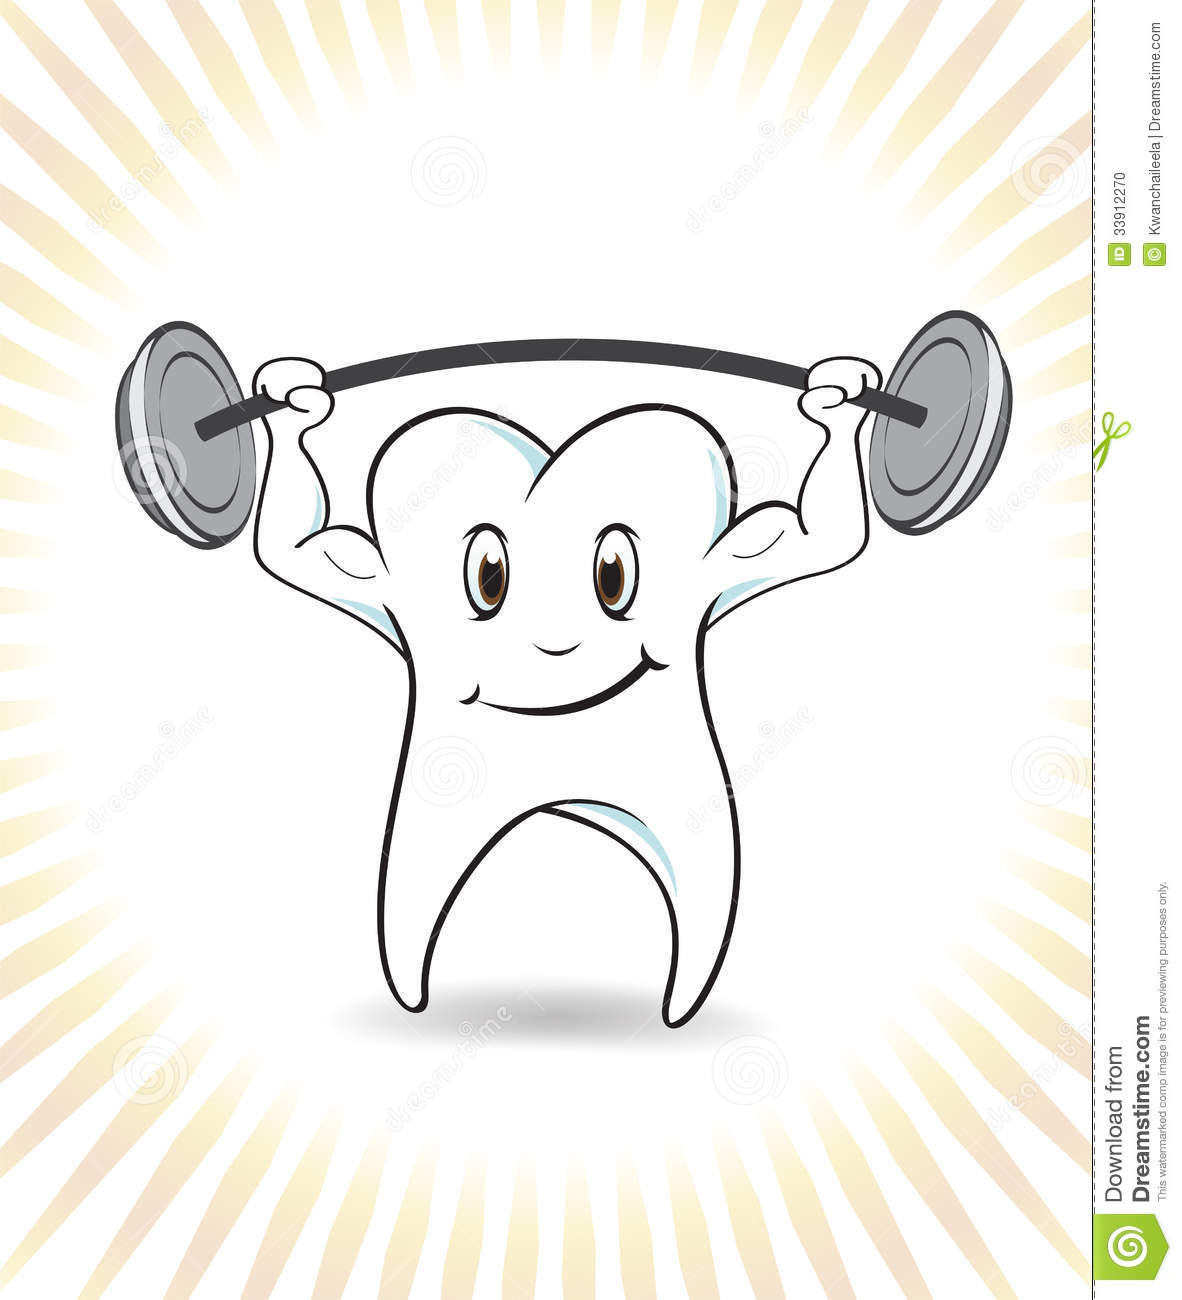 Strong Tooth Stock Photo   Image  33912270